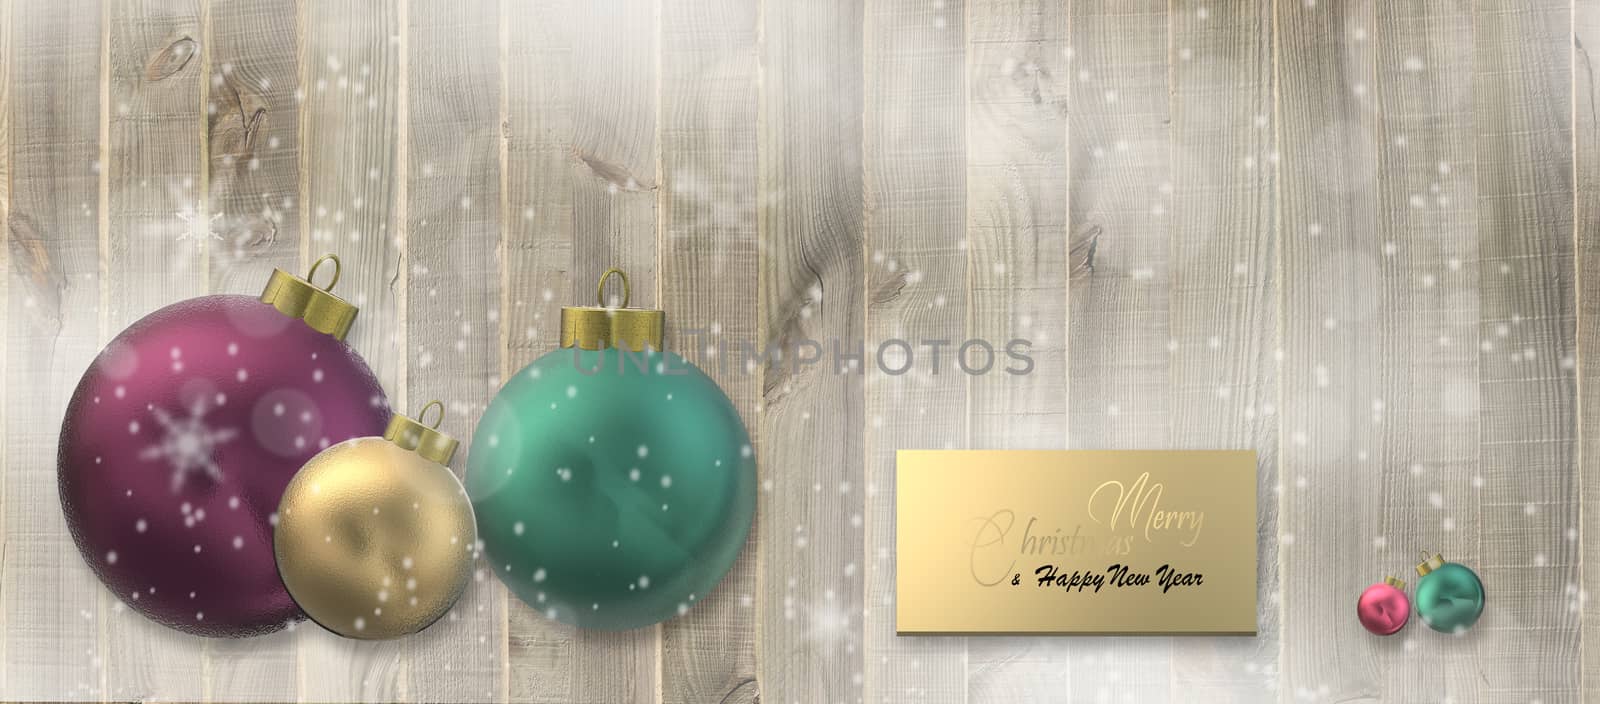 Christmas holiday background on wood by NelliPolk